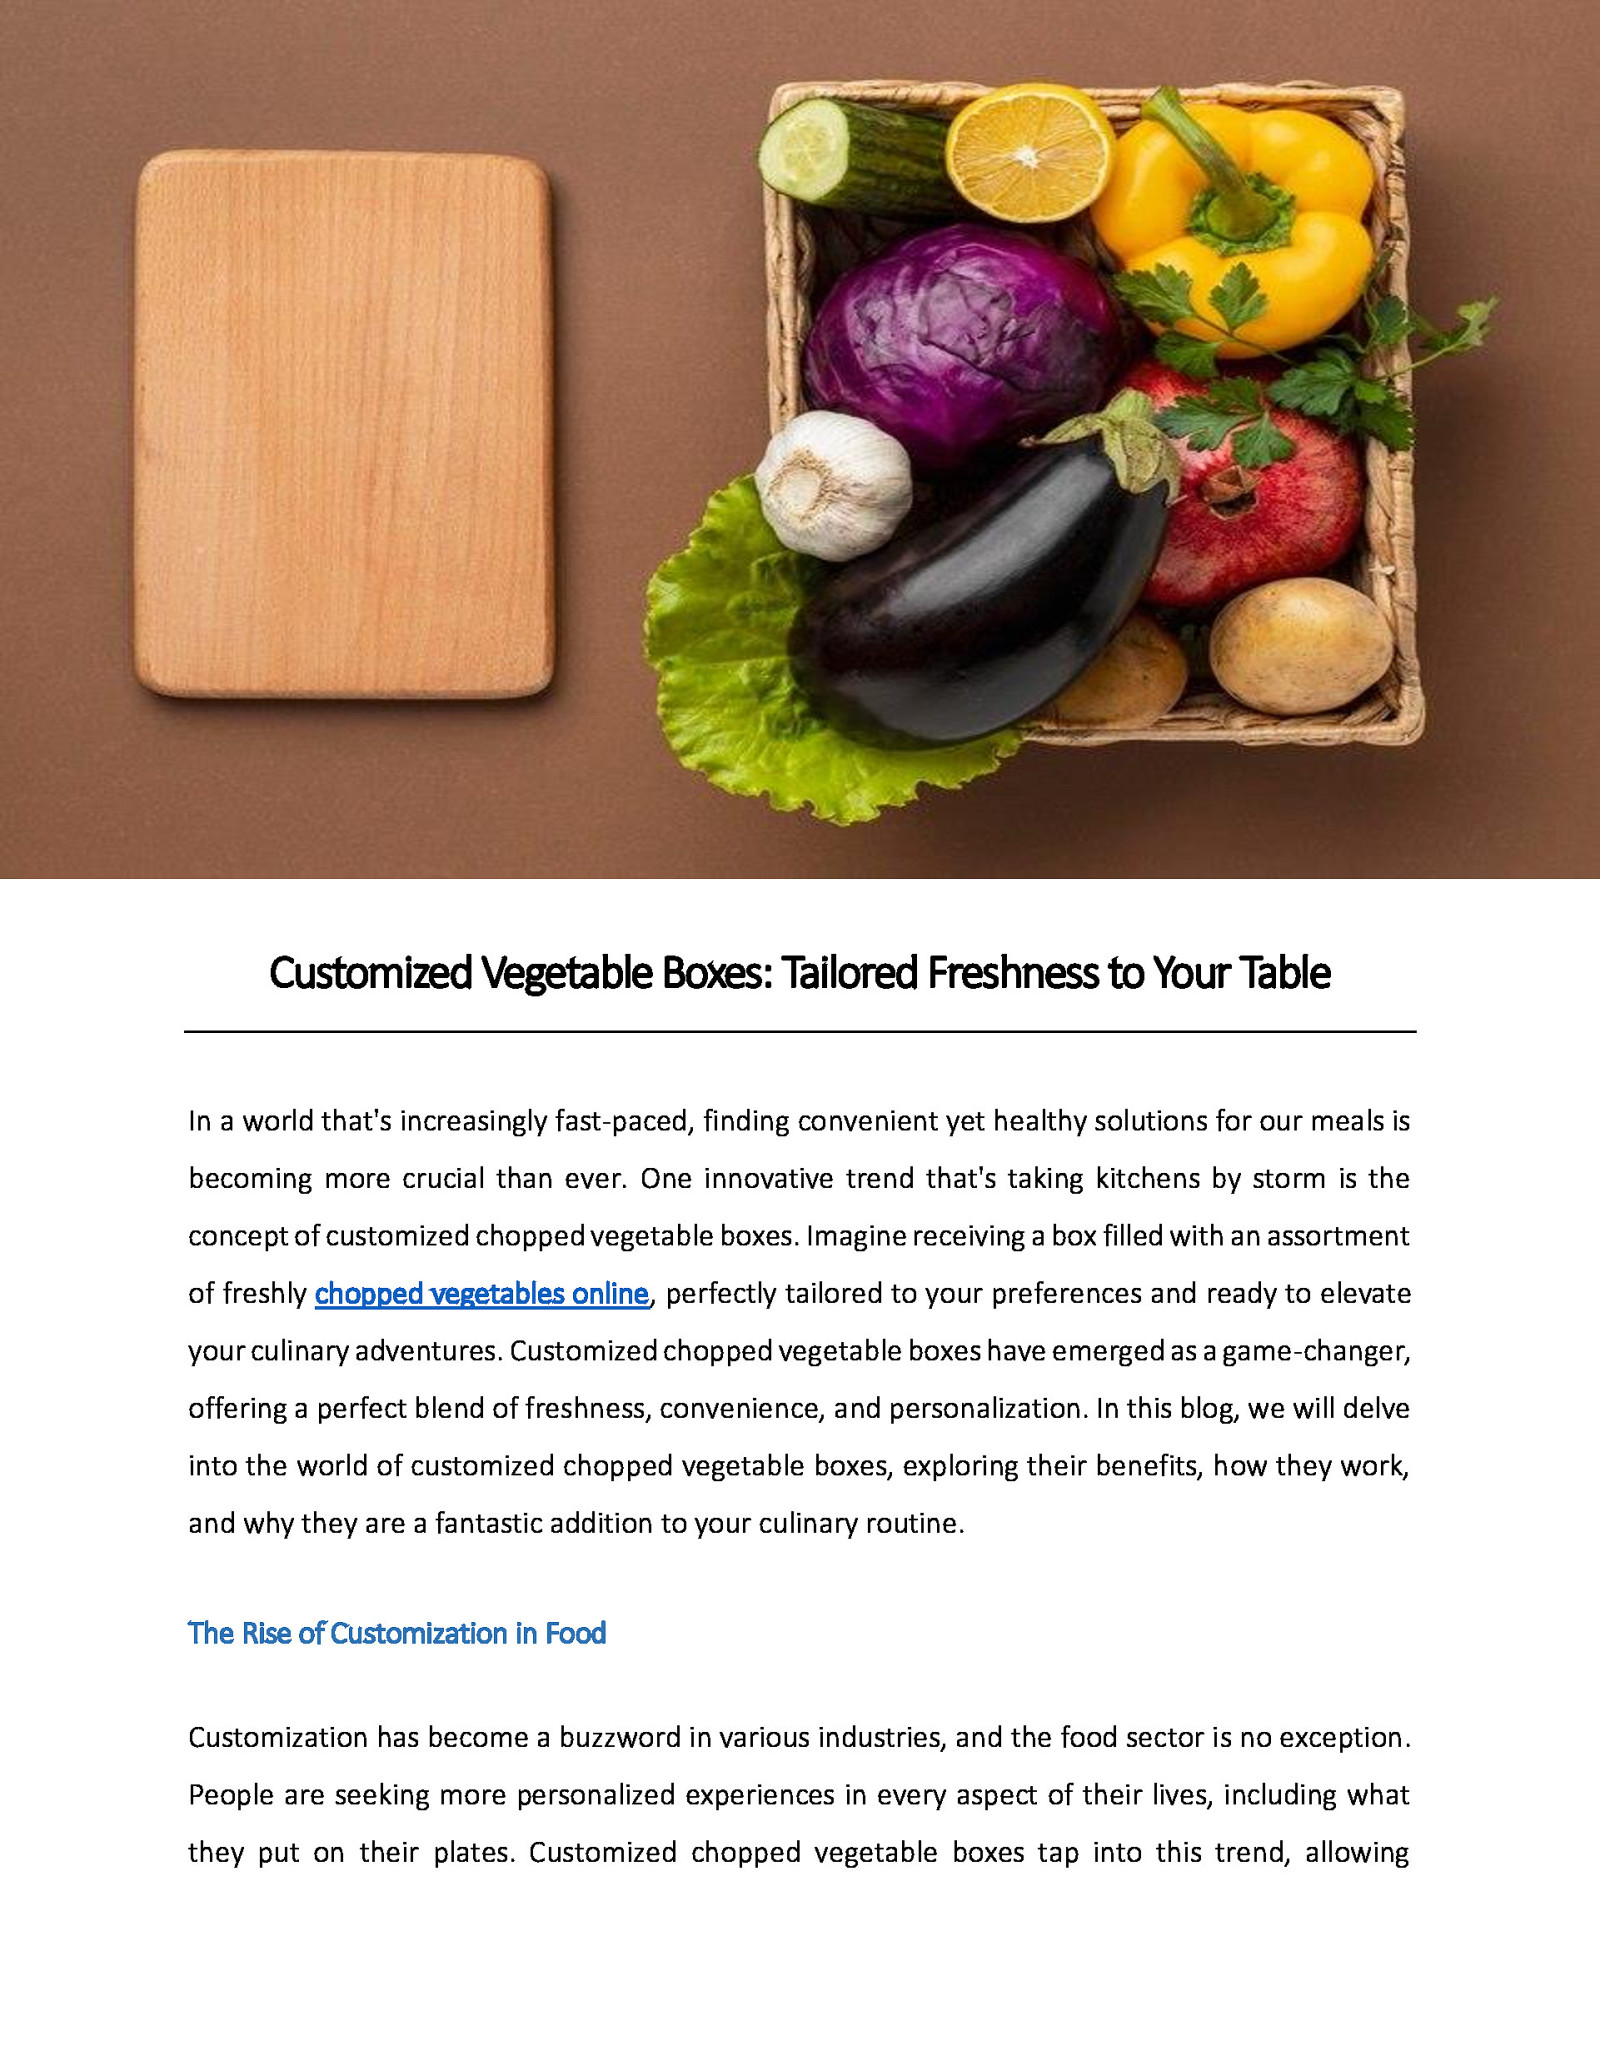 Customized Vegetable Boxes: Tailored Freshness to Your Table